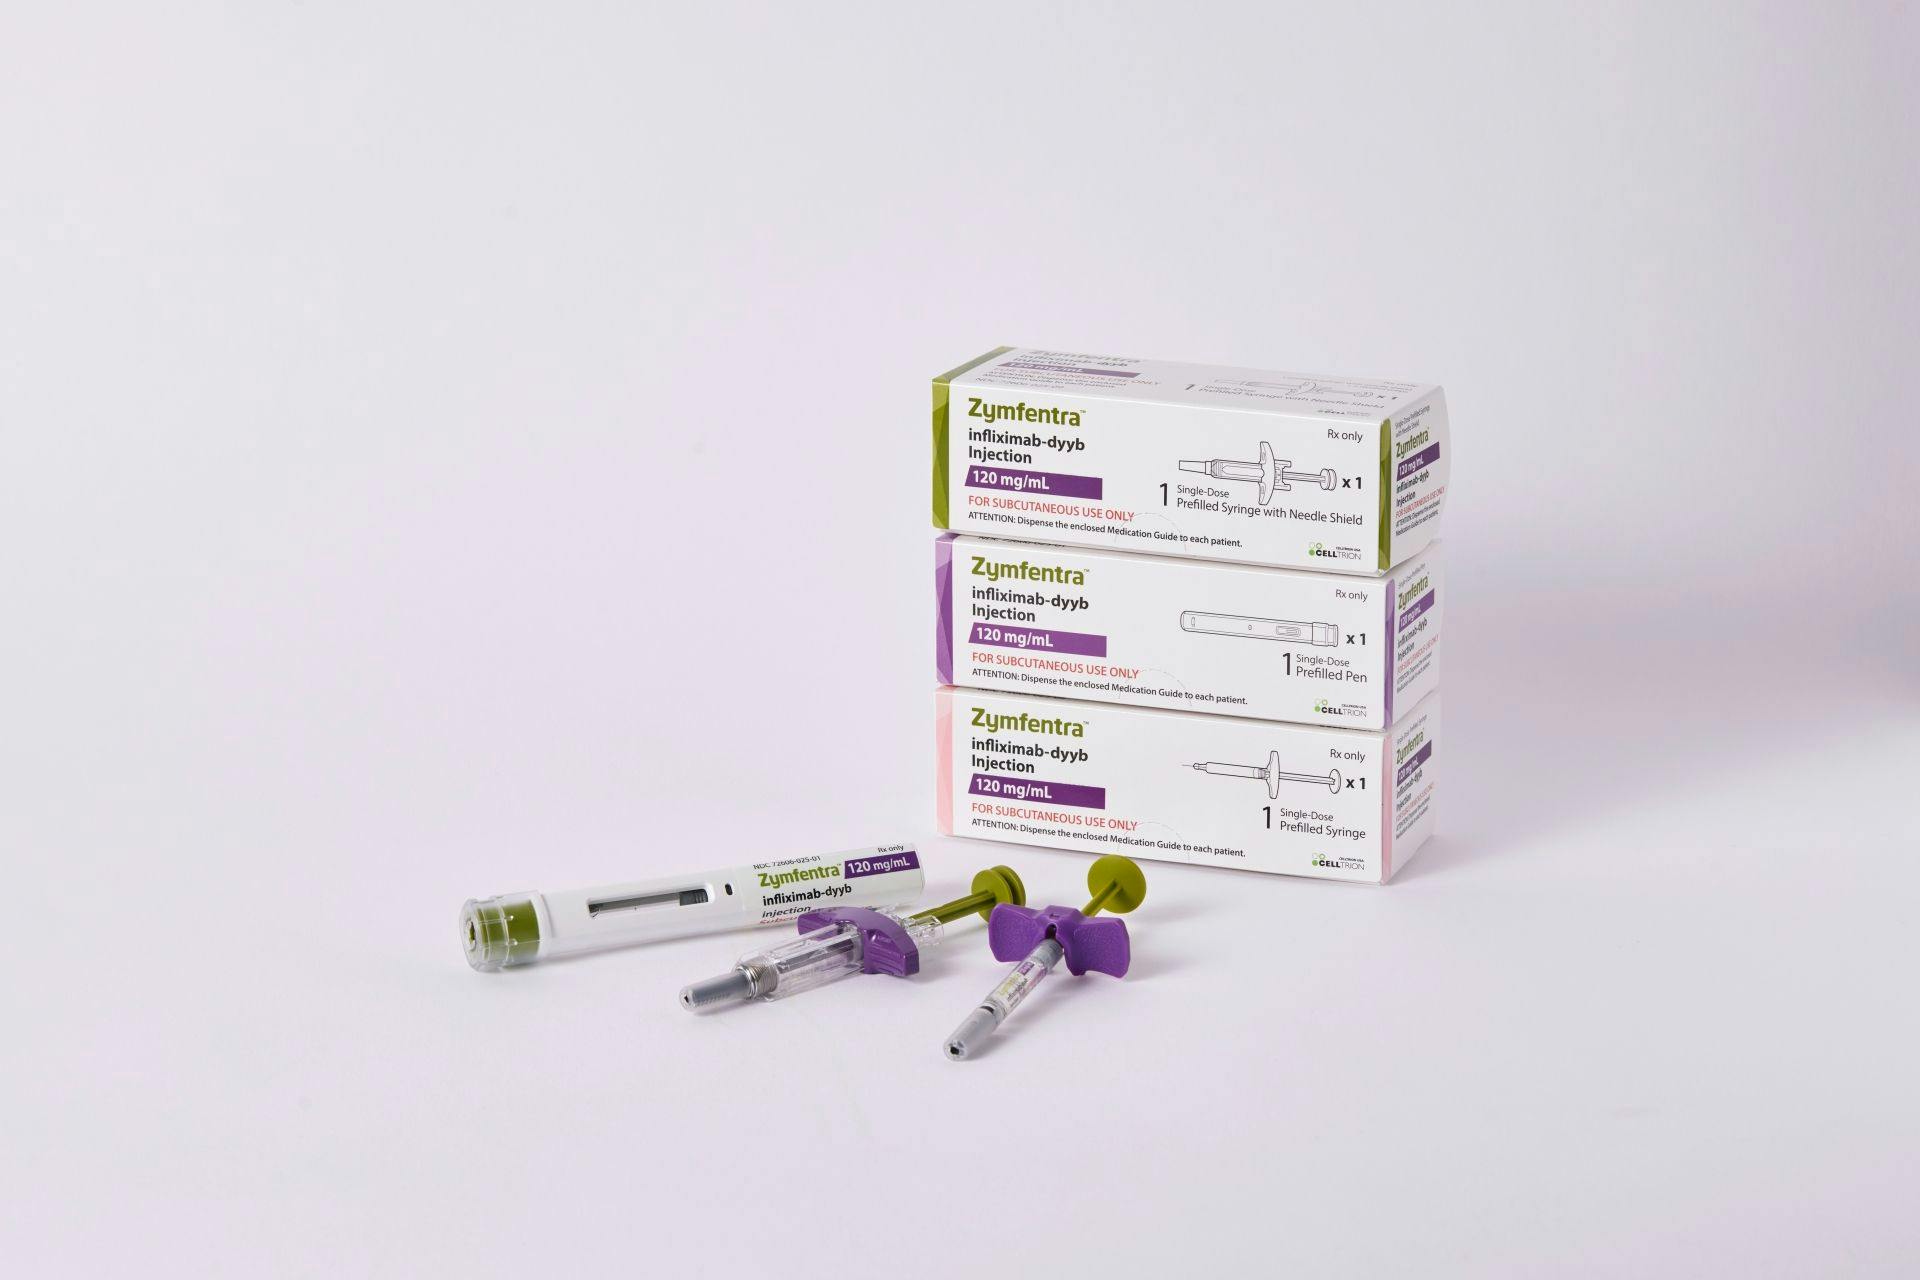 FDA Approves First Subcutaneous Infliximab for IBD